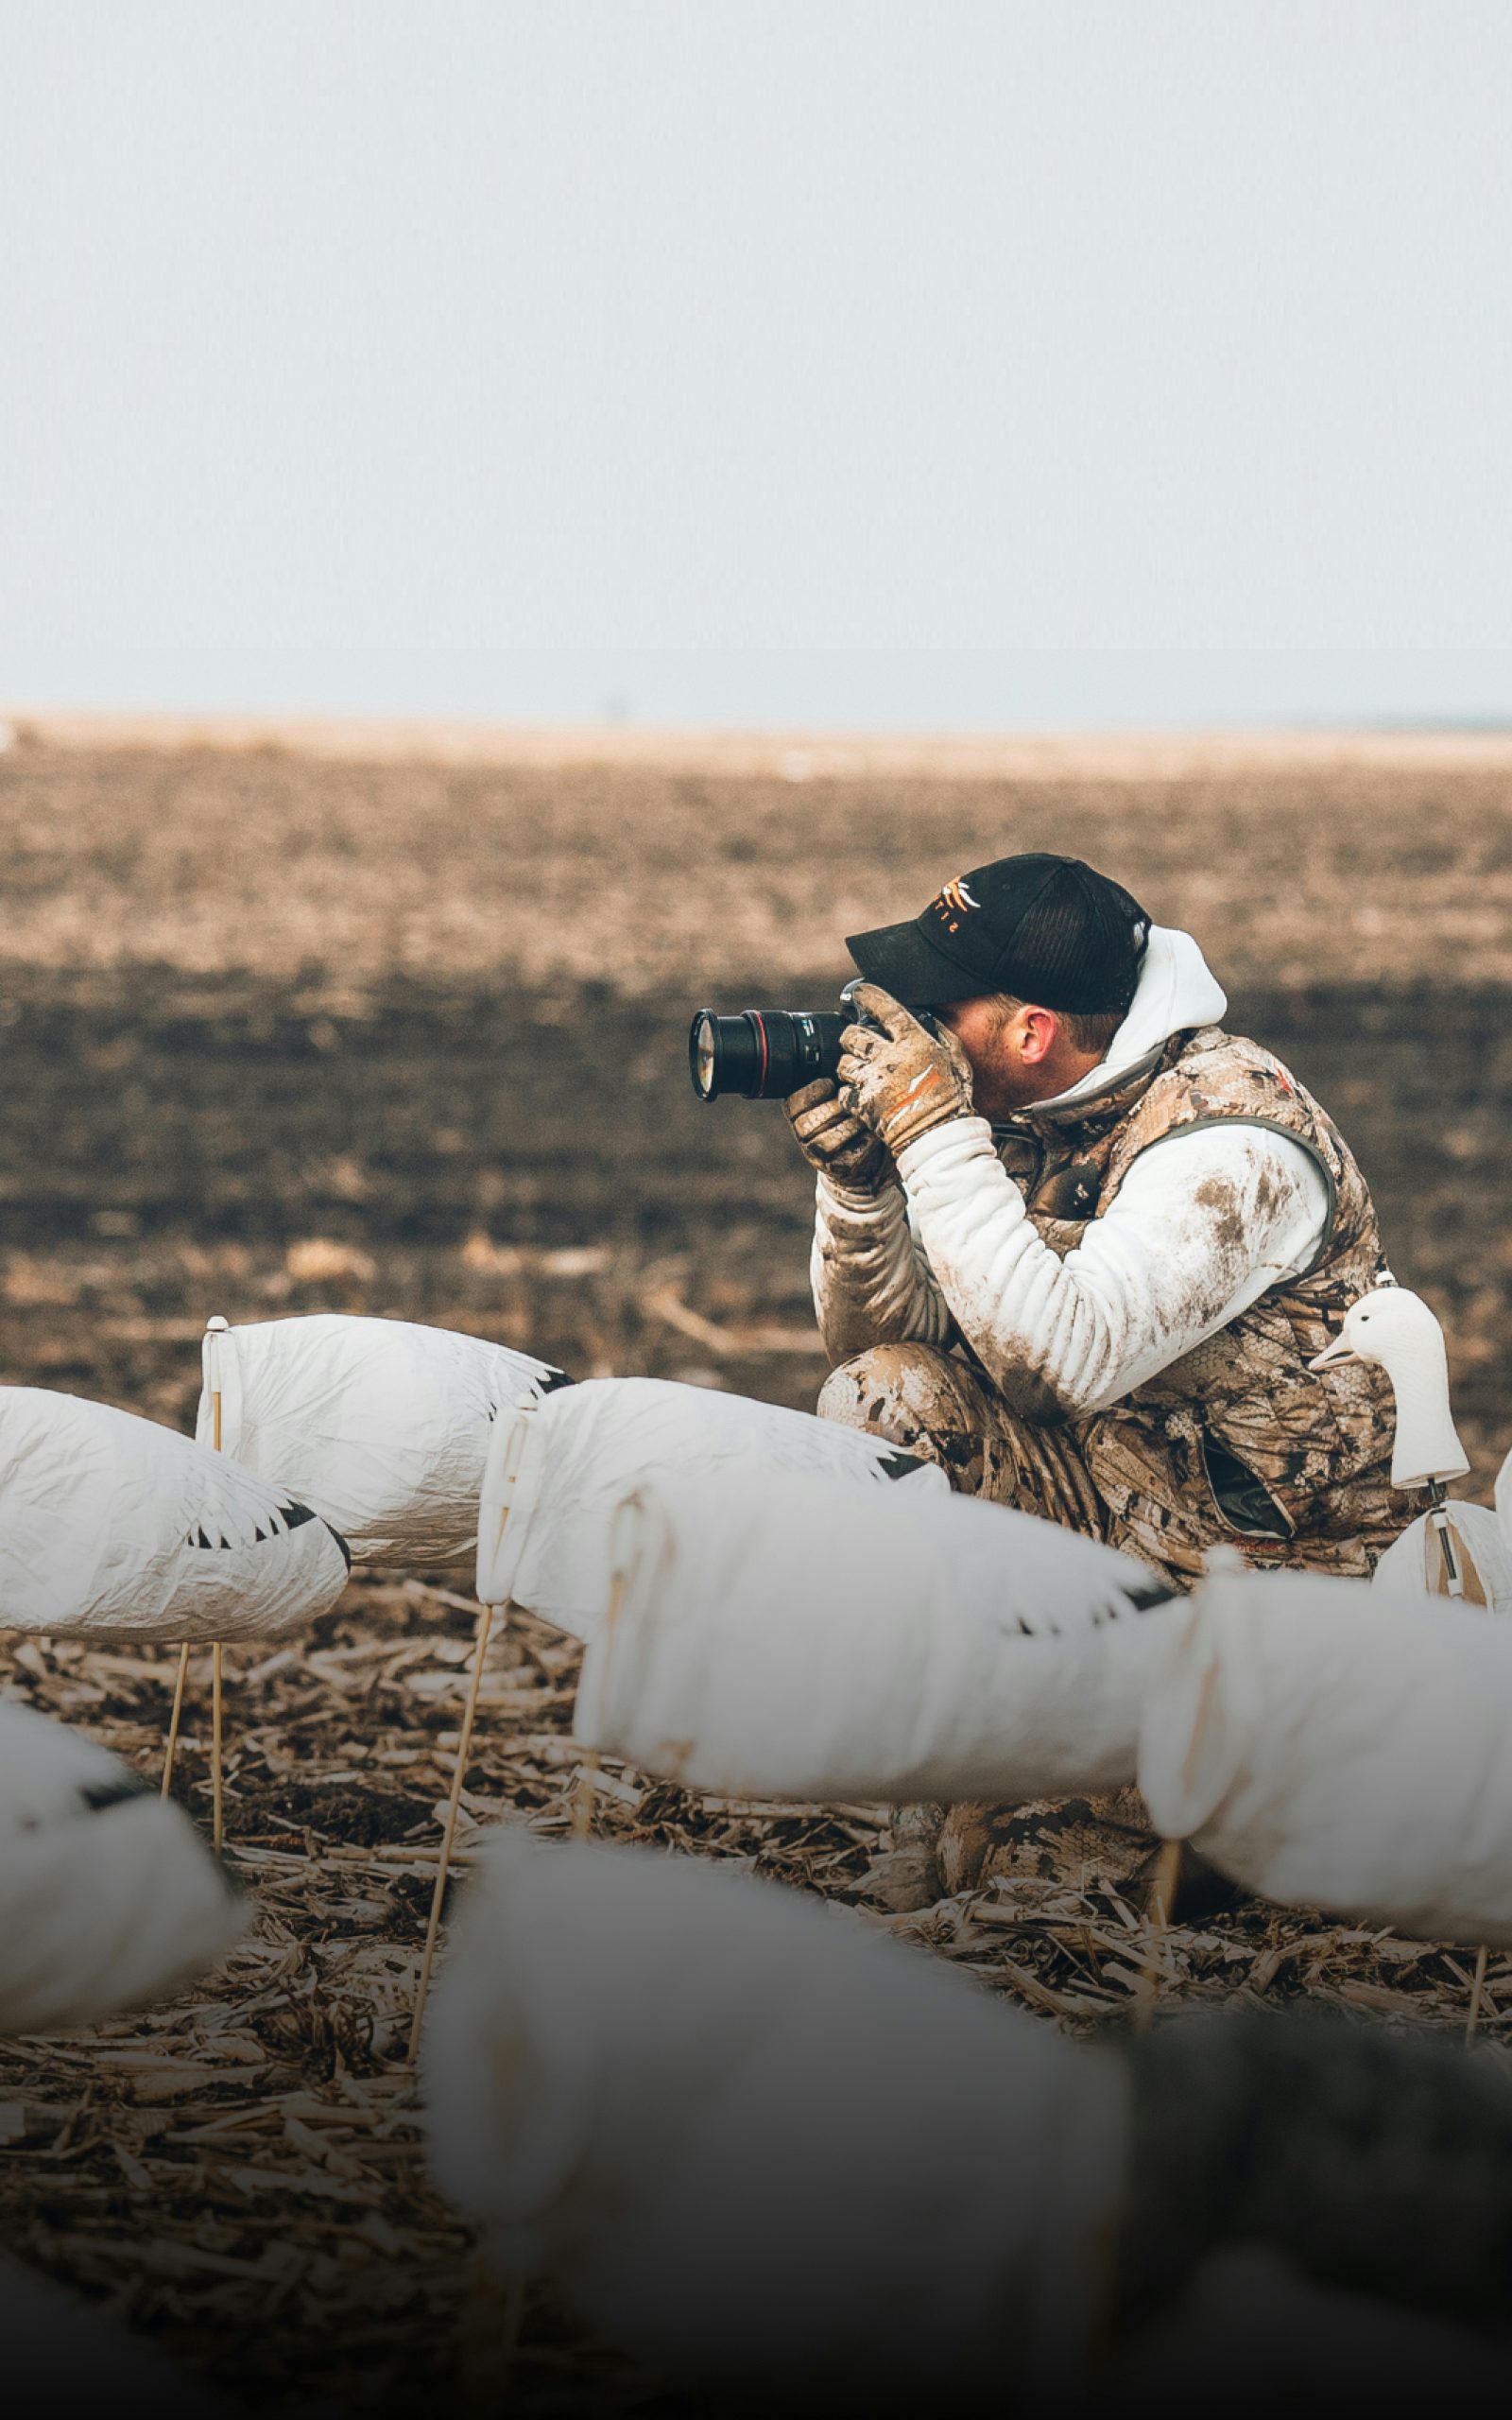 #DIVERGE12 Photographing snow geese | SITKA Gear